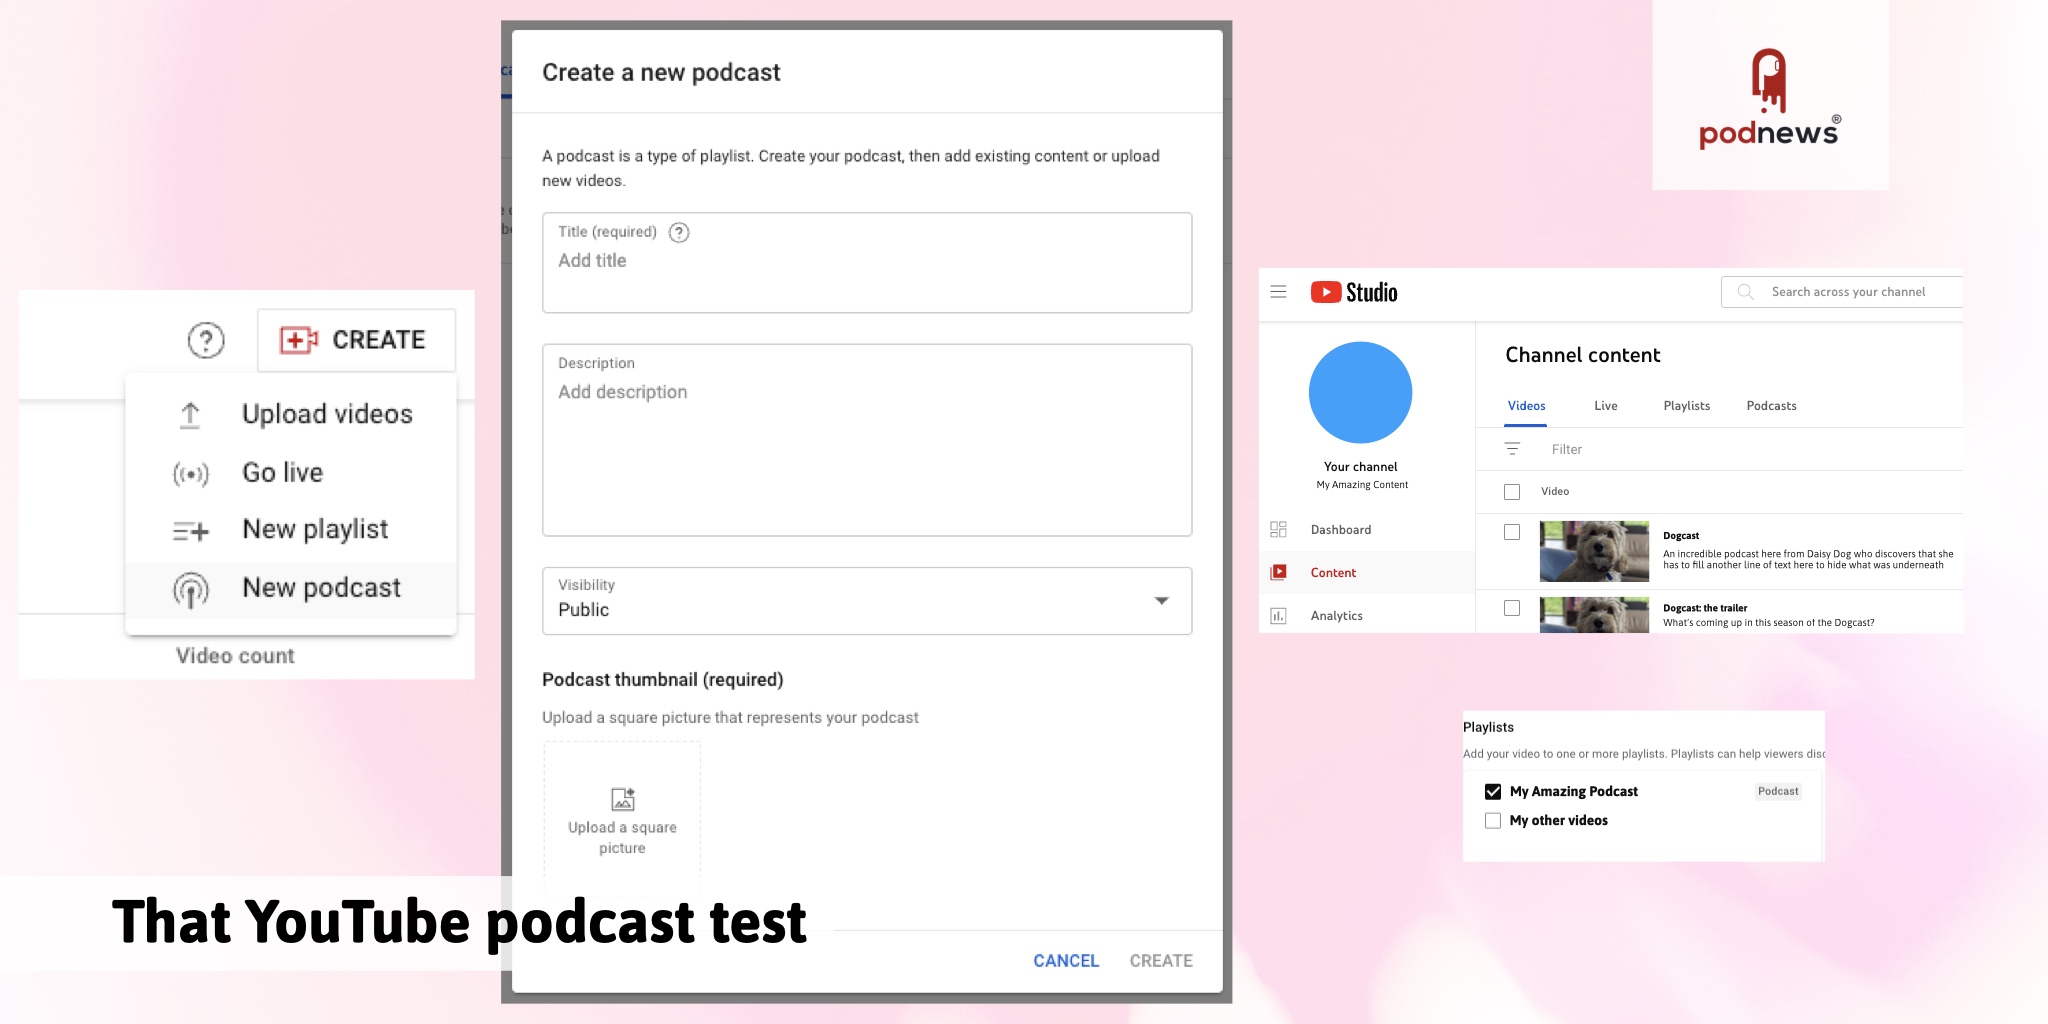 You Tube's podcast test